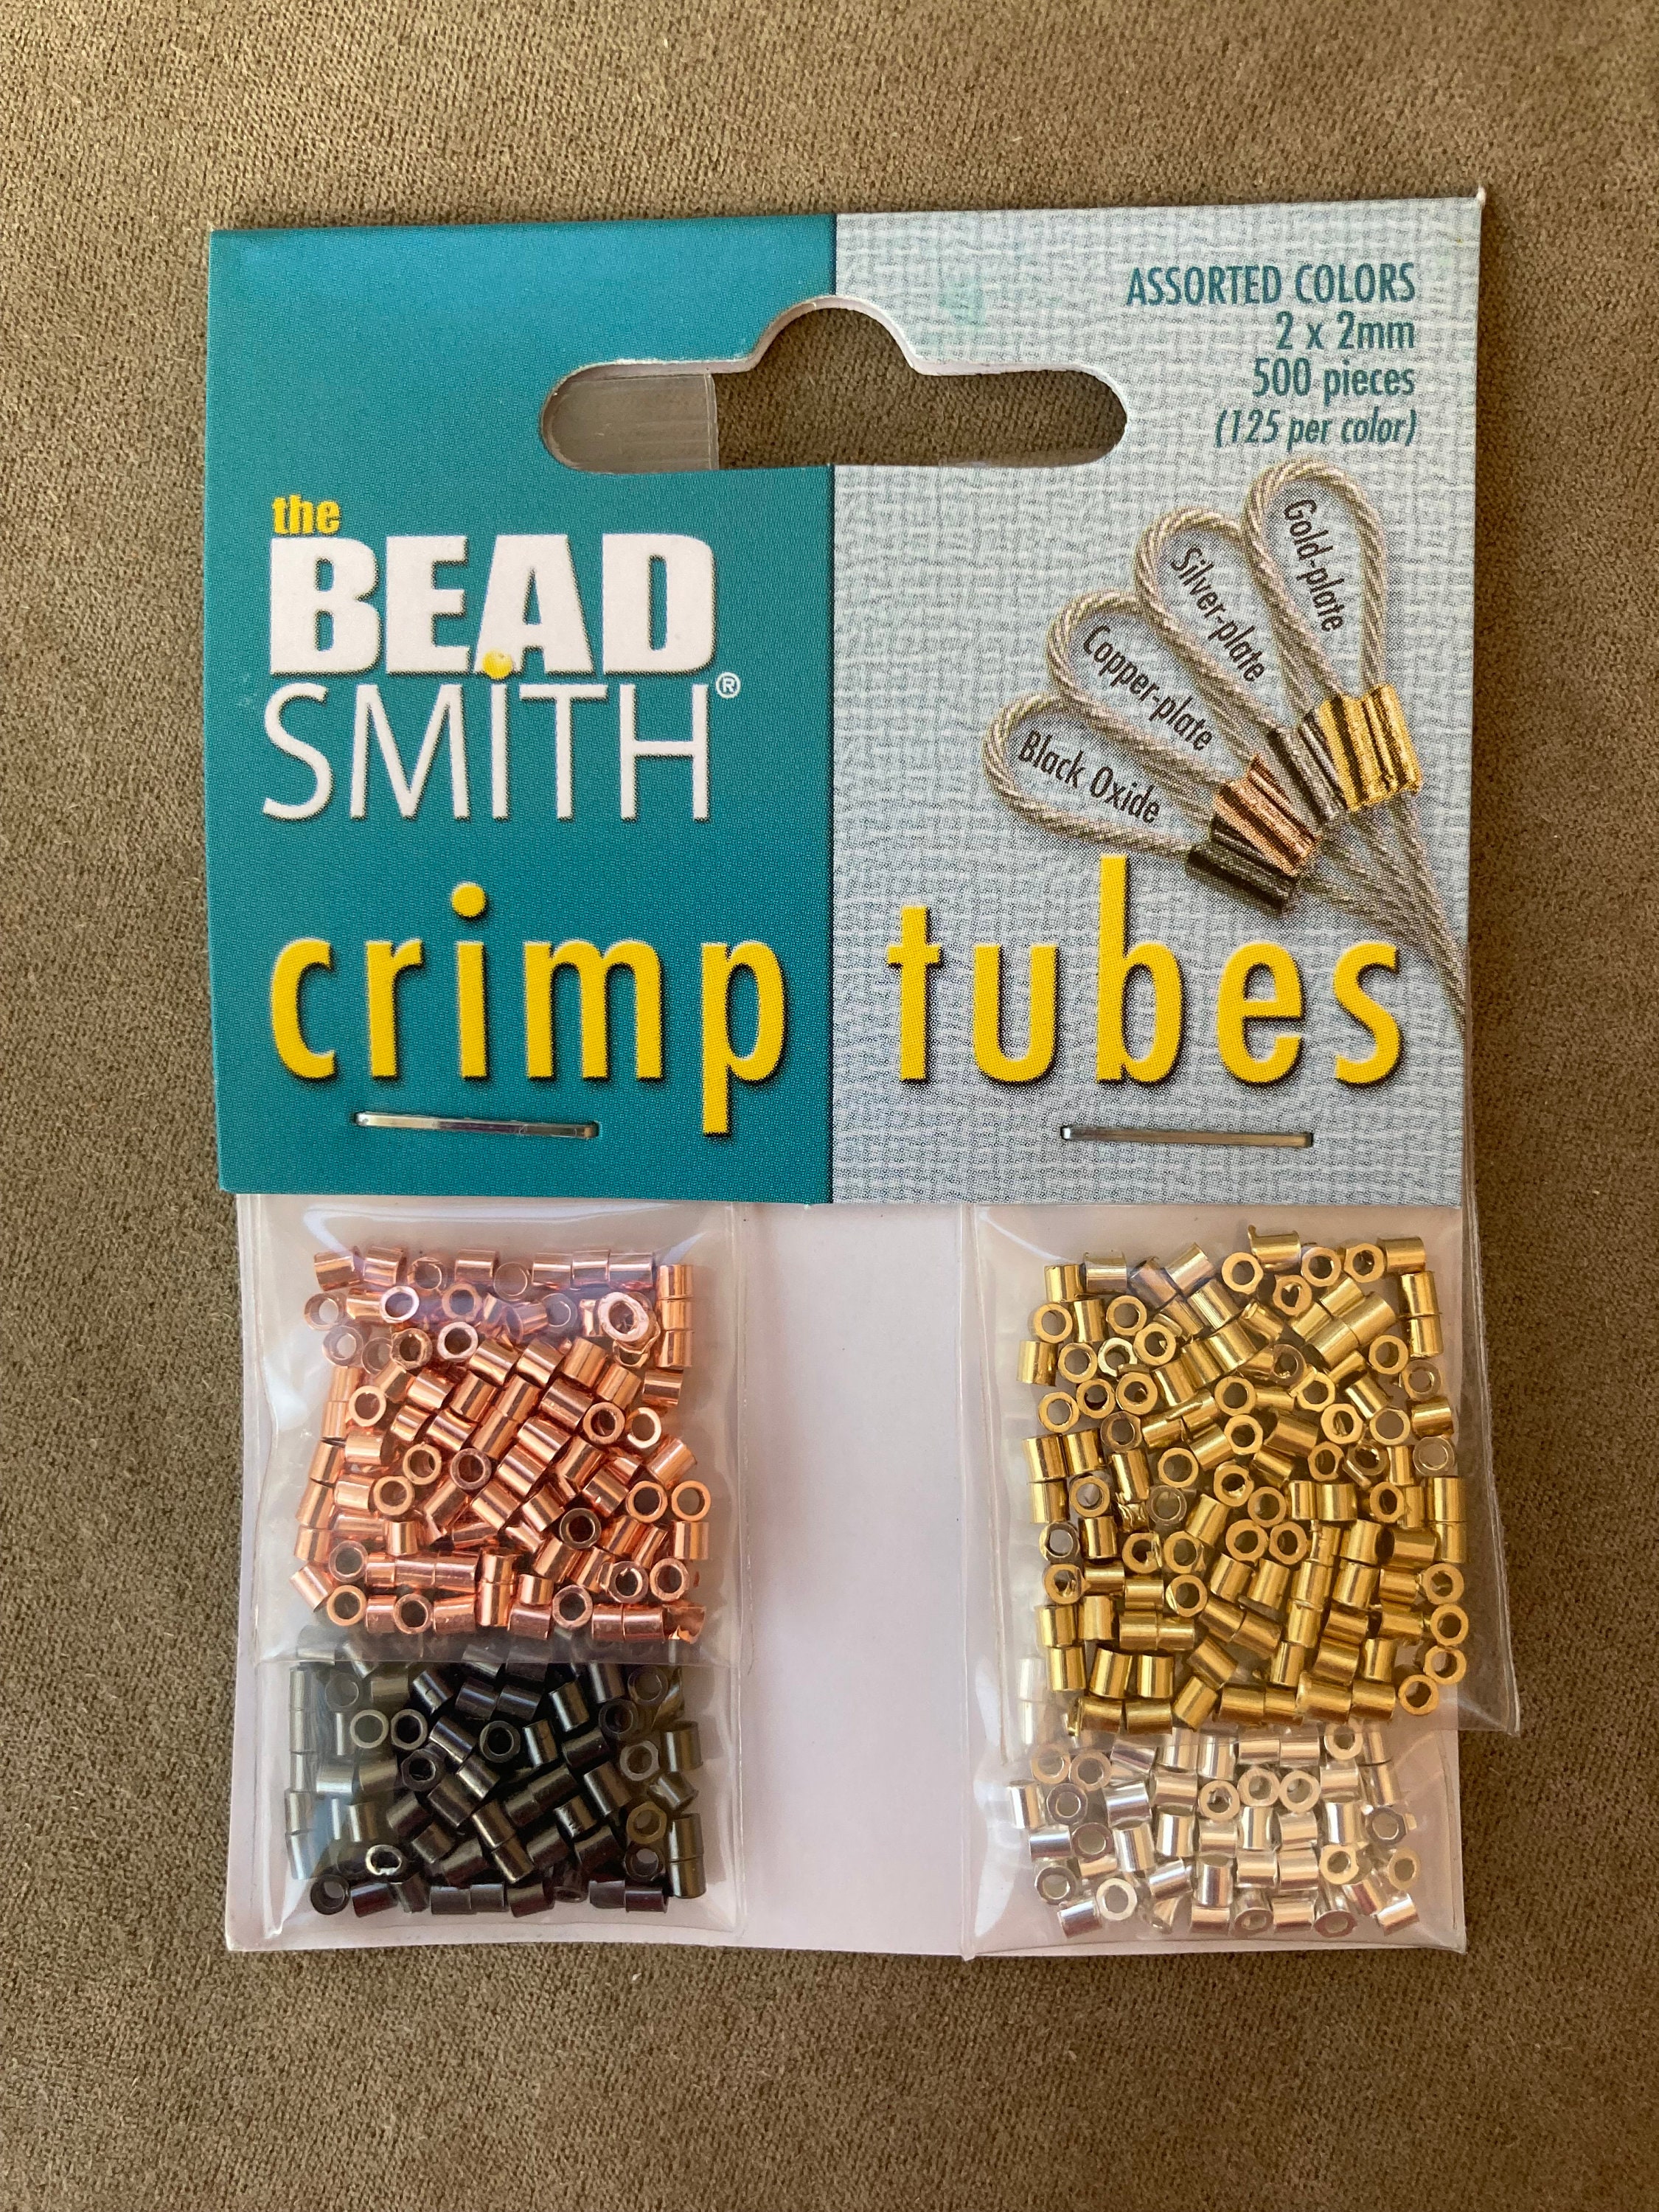 100 Copper Plated 2mm Crimp Beads – Patricia Healey Copper